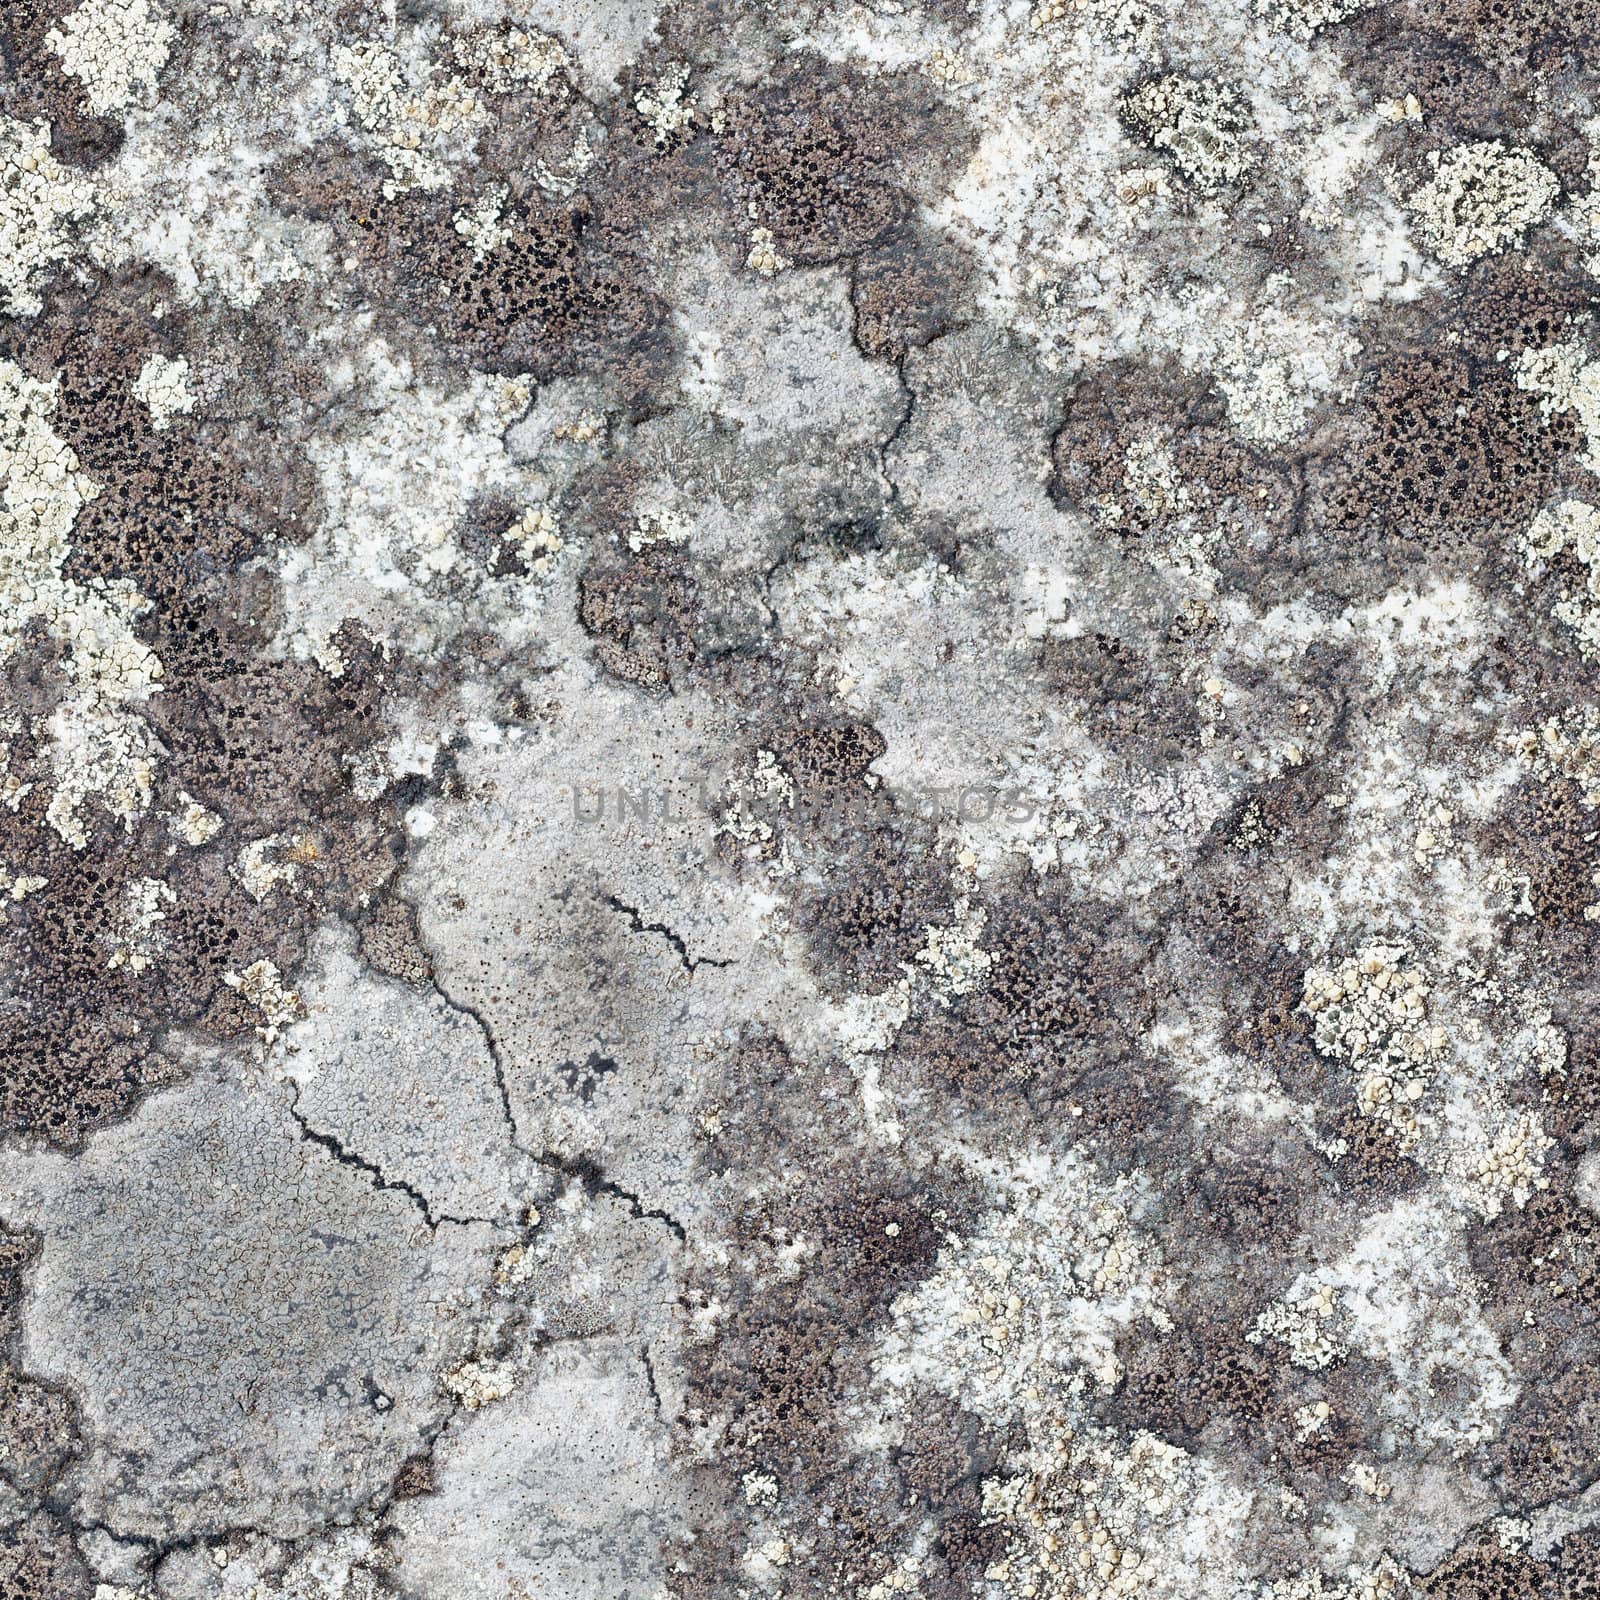 Granite rock with lichen - seamless texture by pzaxe